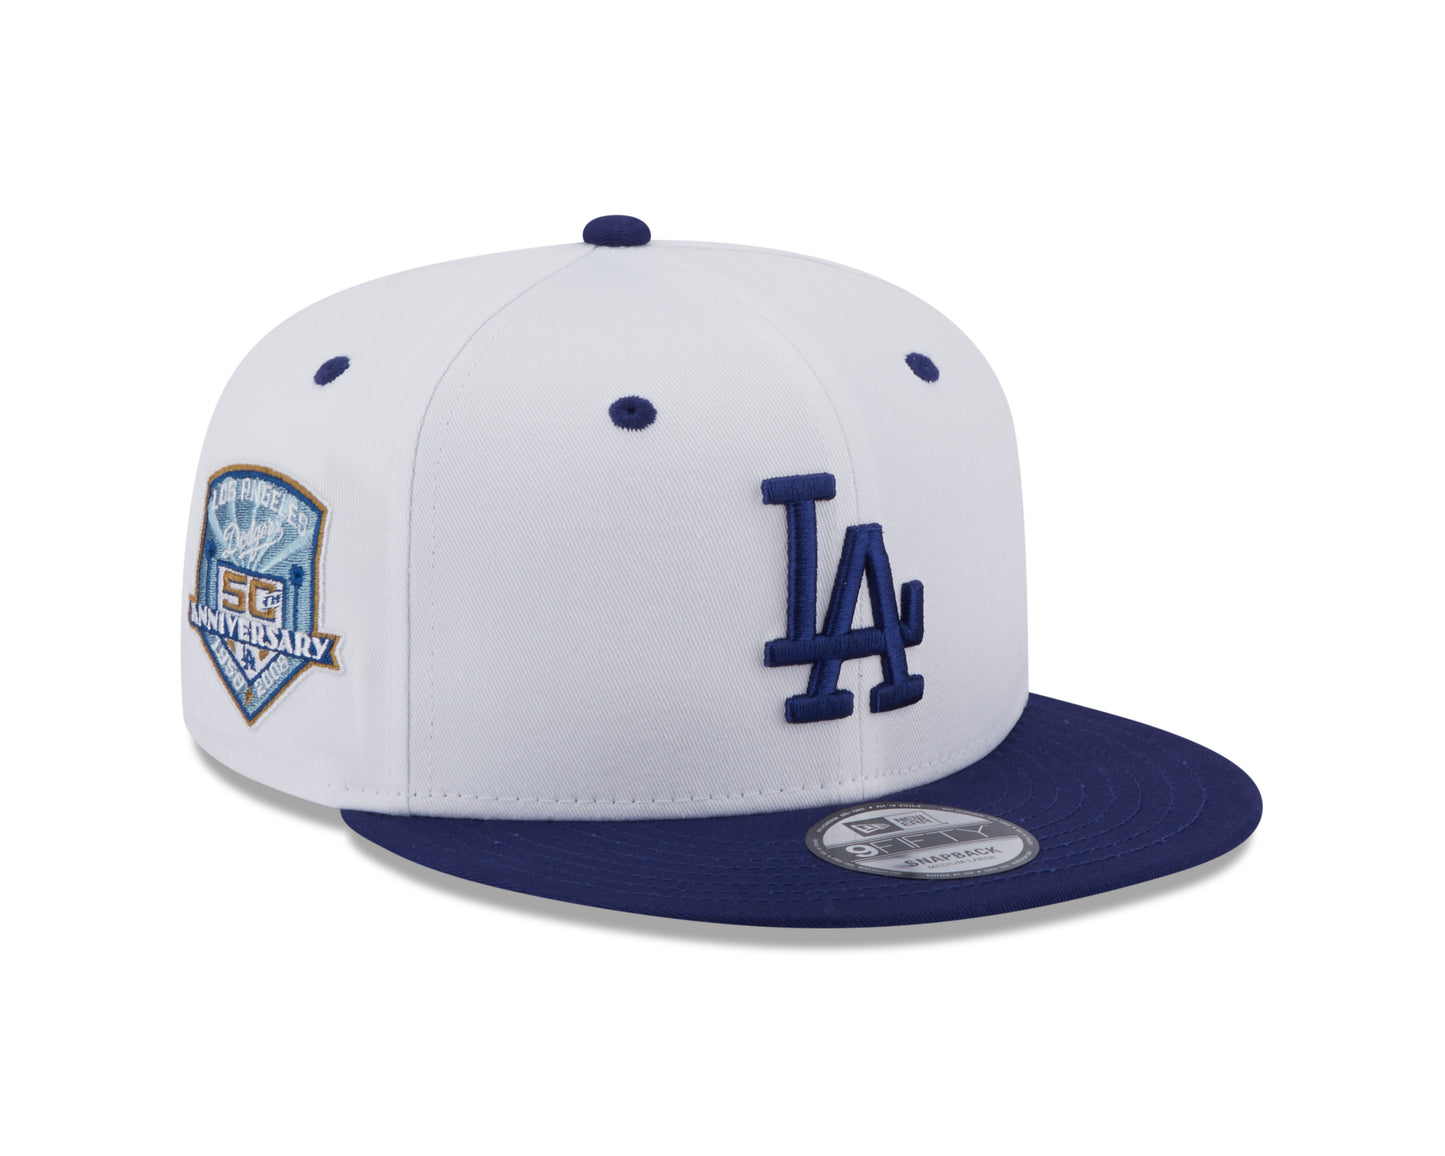 New Era 9Fifty Crown Patch Los Angeles Dodgers - White/Royal Blue - Headz Up 